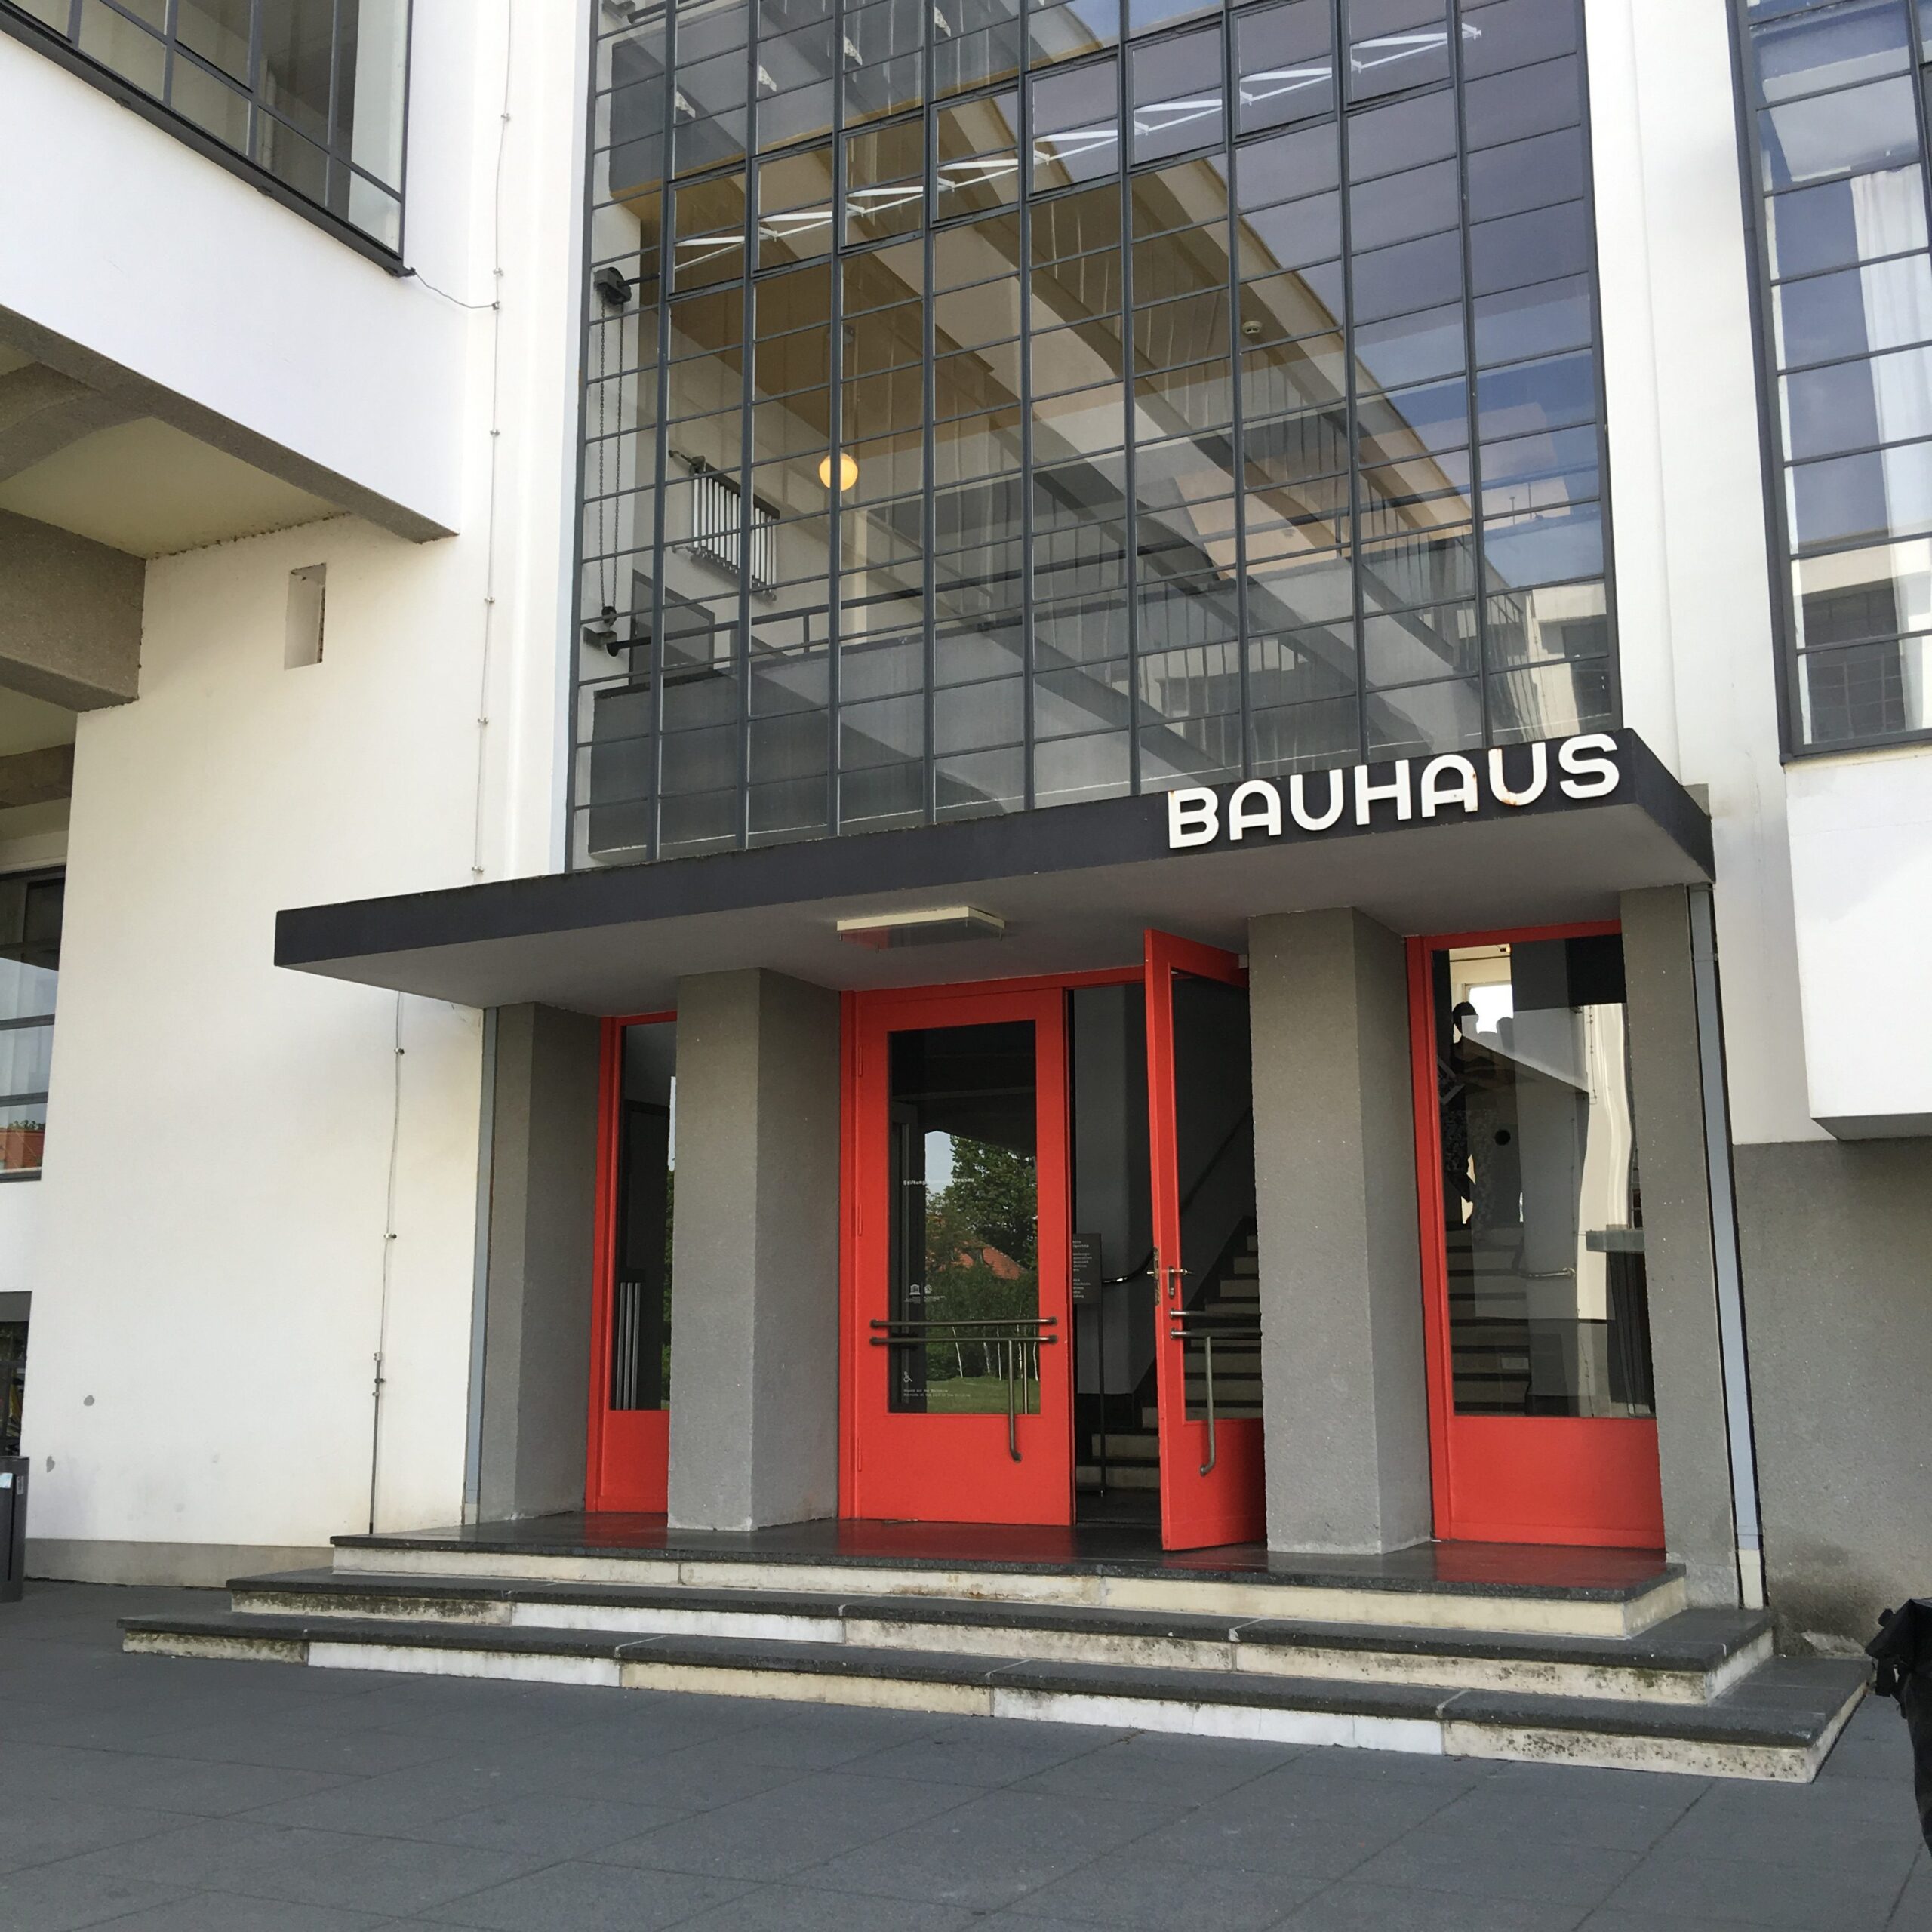 entrance to the Bauhaus School in Dessau Germany